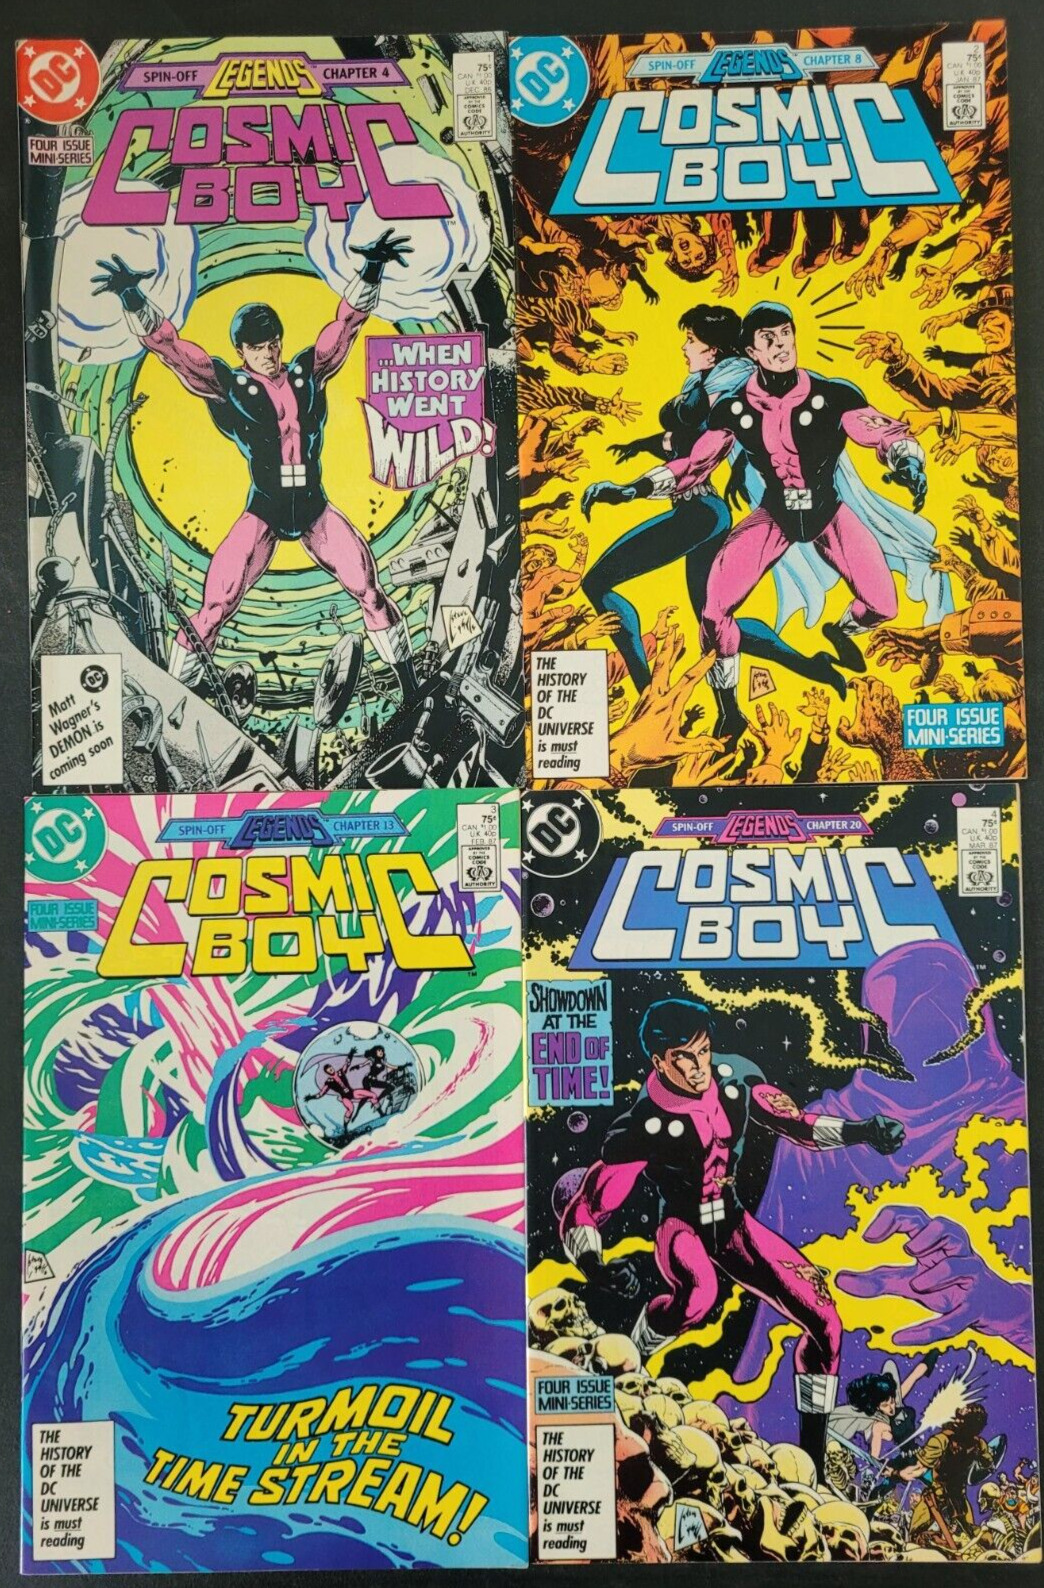 COSMIC BOY #1-4 (1986) DC COMICS LEGENDS SPIN-OFF FULL COMPLETE SERIES